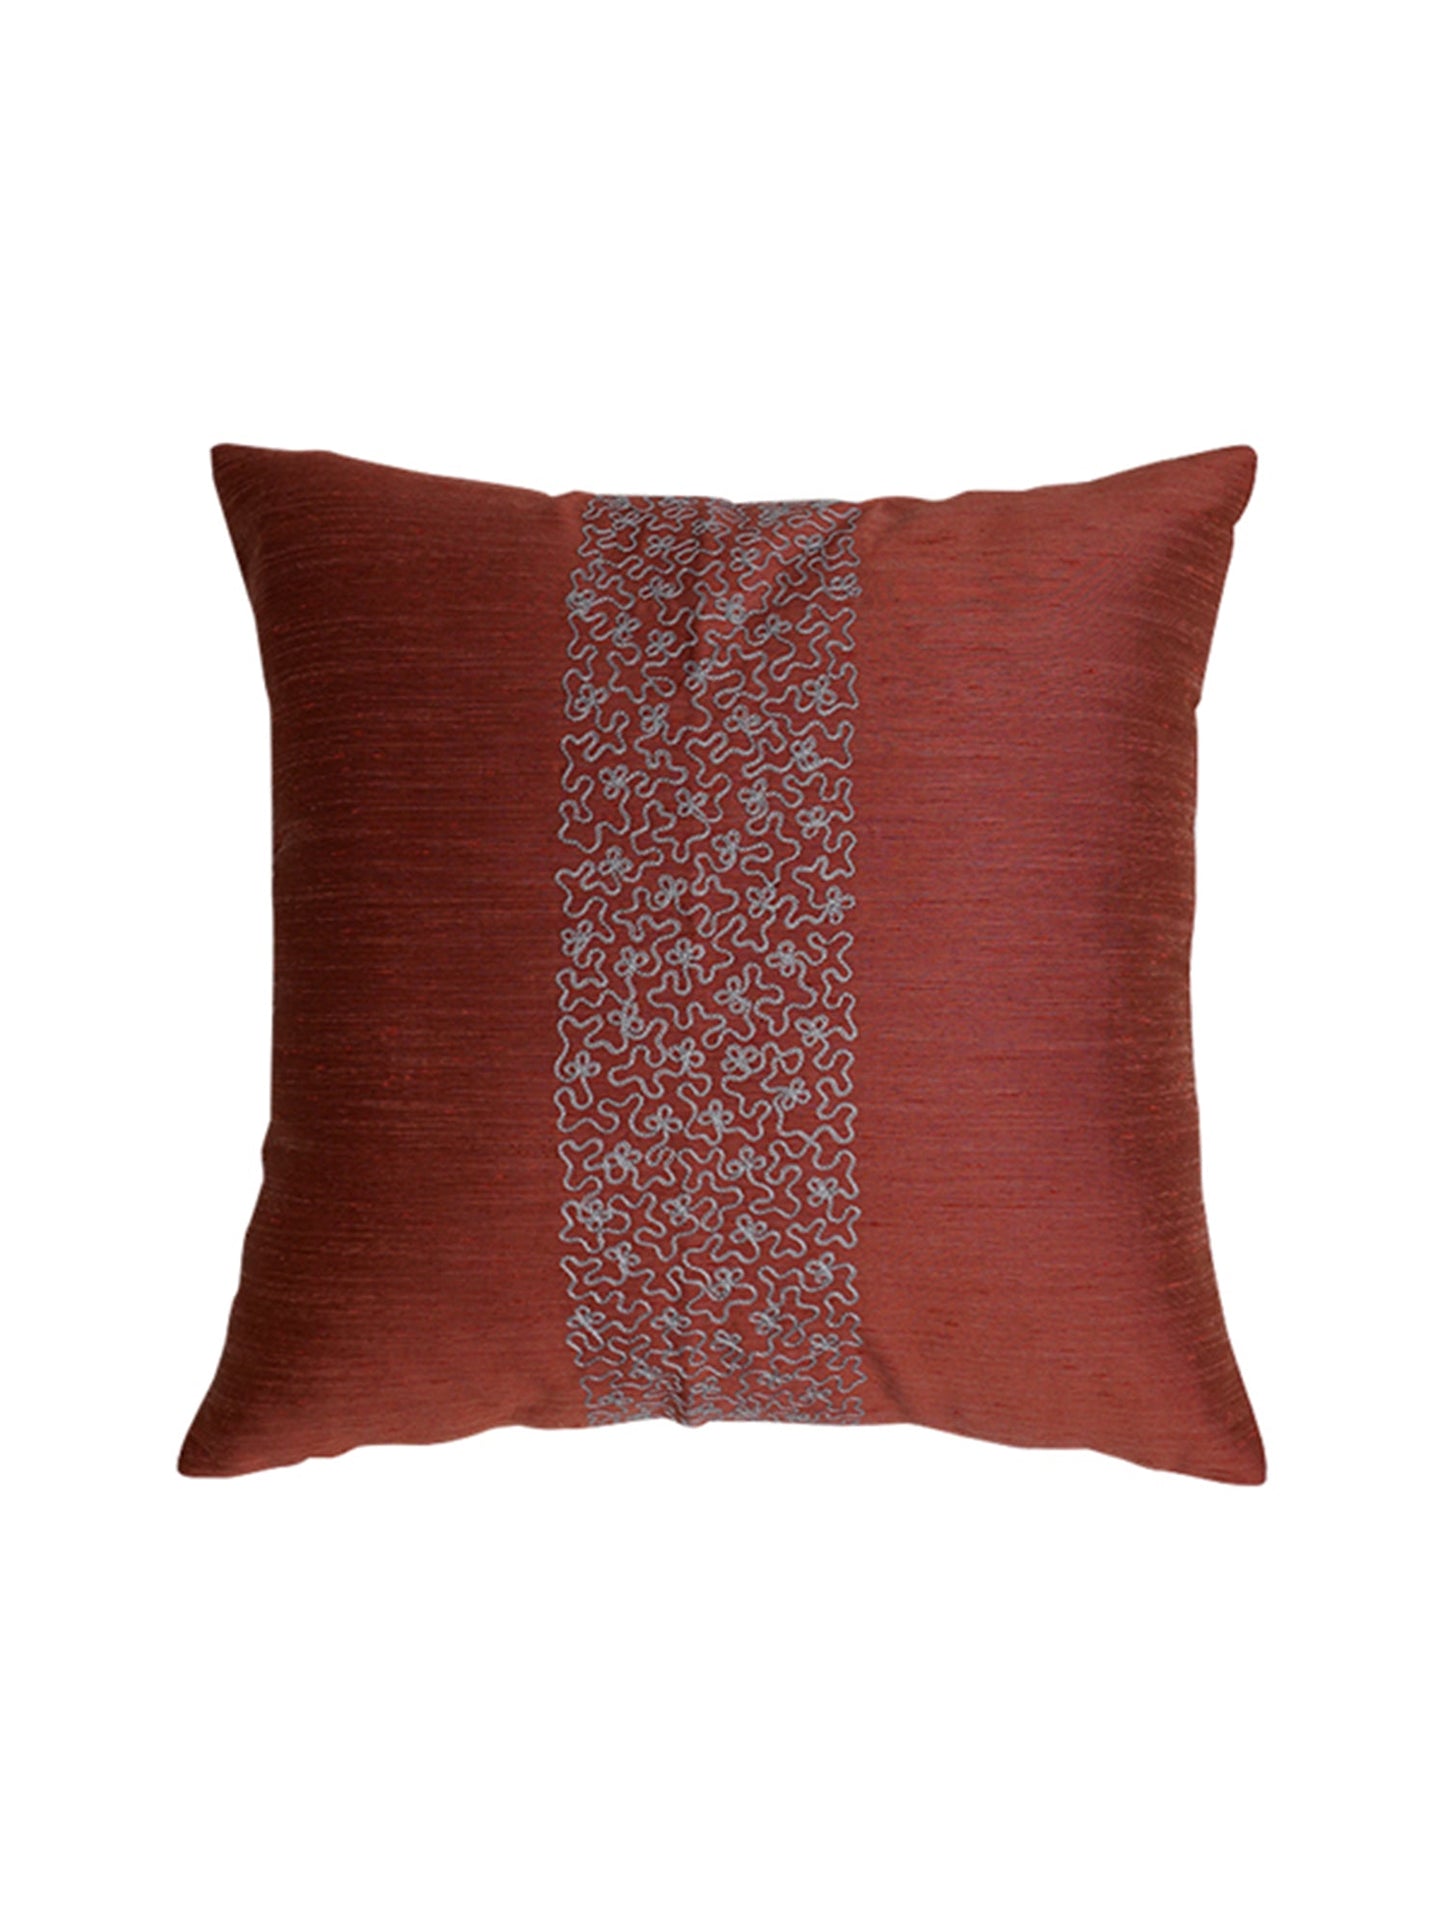 Embroidered Cushion Cover Polyester Blend  Rust - 16" X 16"